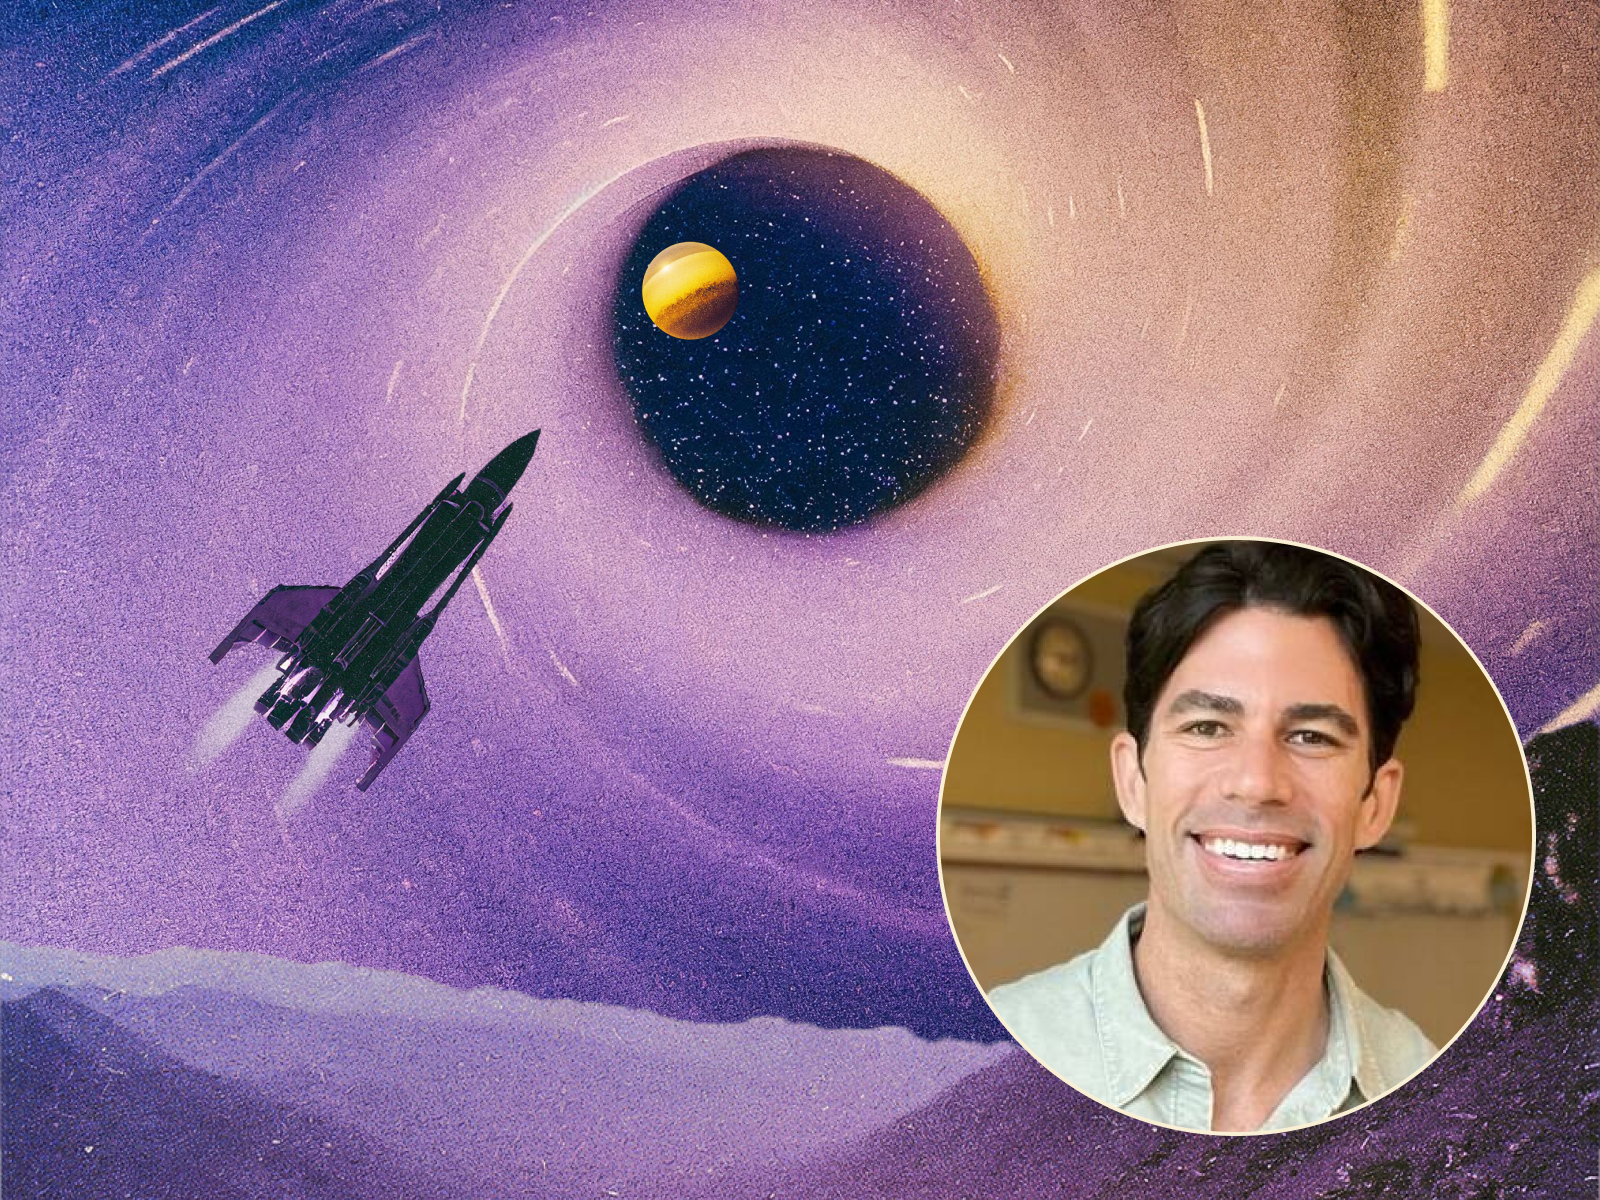 Image of the speaker Nicholas Ferroni with the background of a space ship and a purple vortex